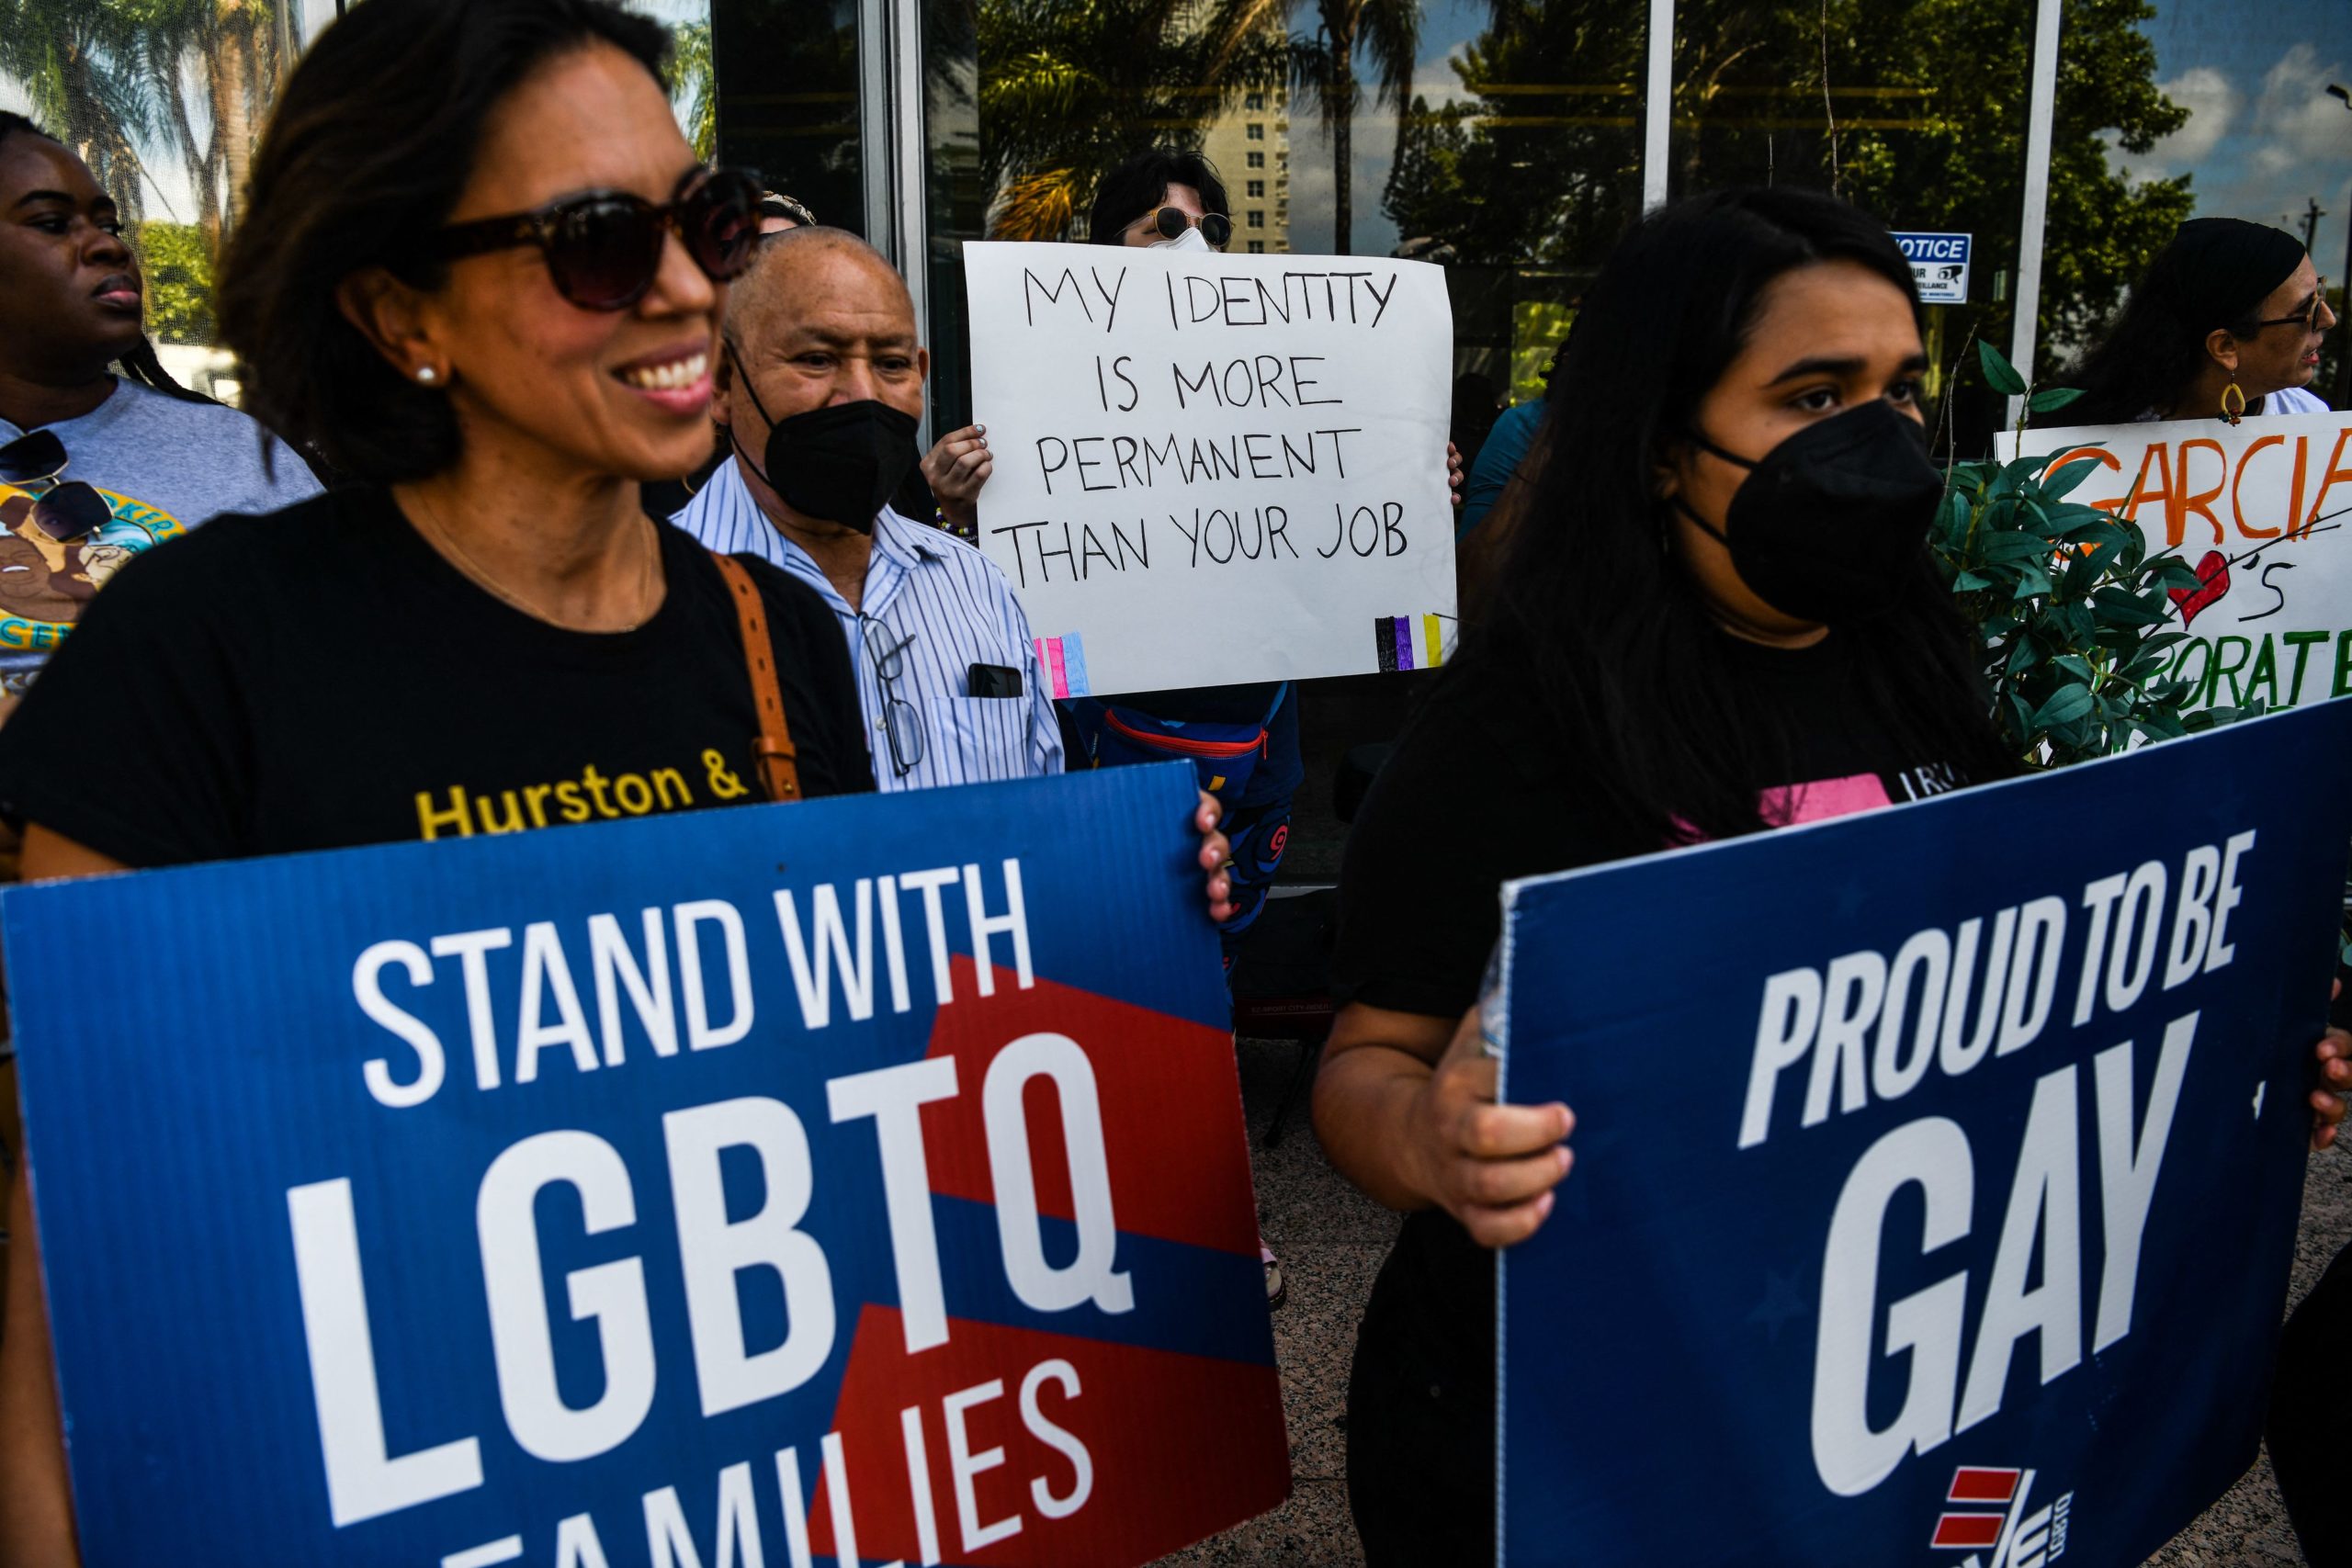 People hold placards as they protest outside the office of Florida State Senator Ileana Garcia in Coral Gables, Florida, on March 9, 2022. - Both the Florida Senate and House passed a bill that would limit what classrooms can teach about sexual orientation and gender identity. (Photo by CHANDAN KHANNA / AFP) (Photo by CHANDAN KHANNA/AFP via Getty Images)